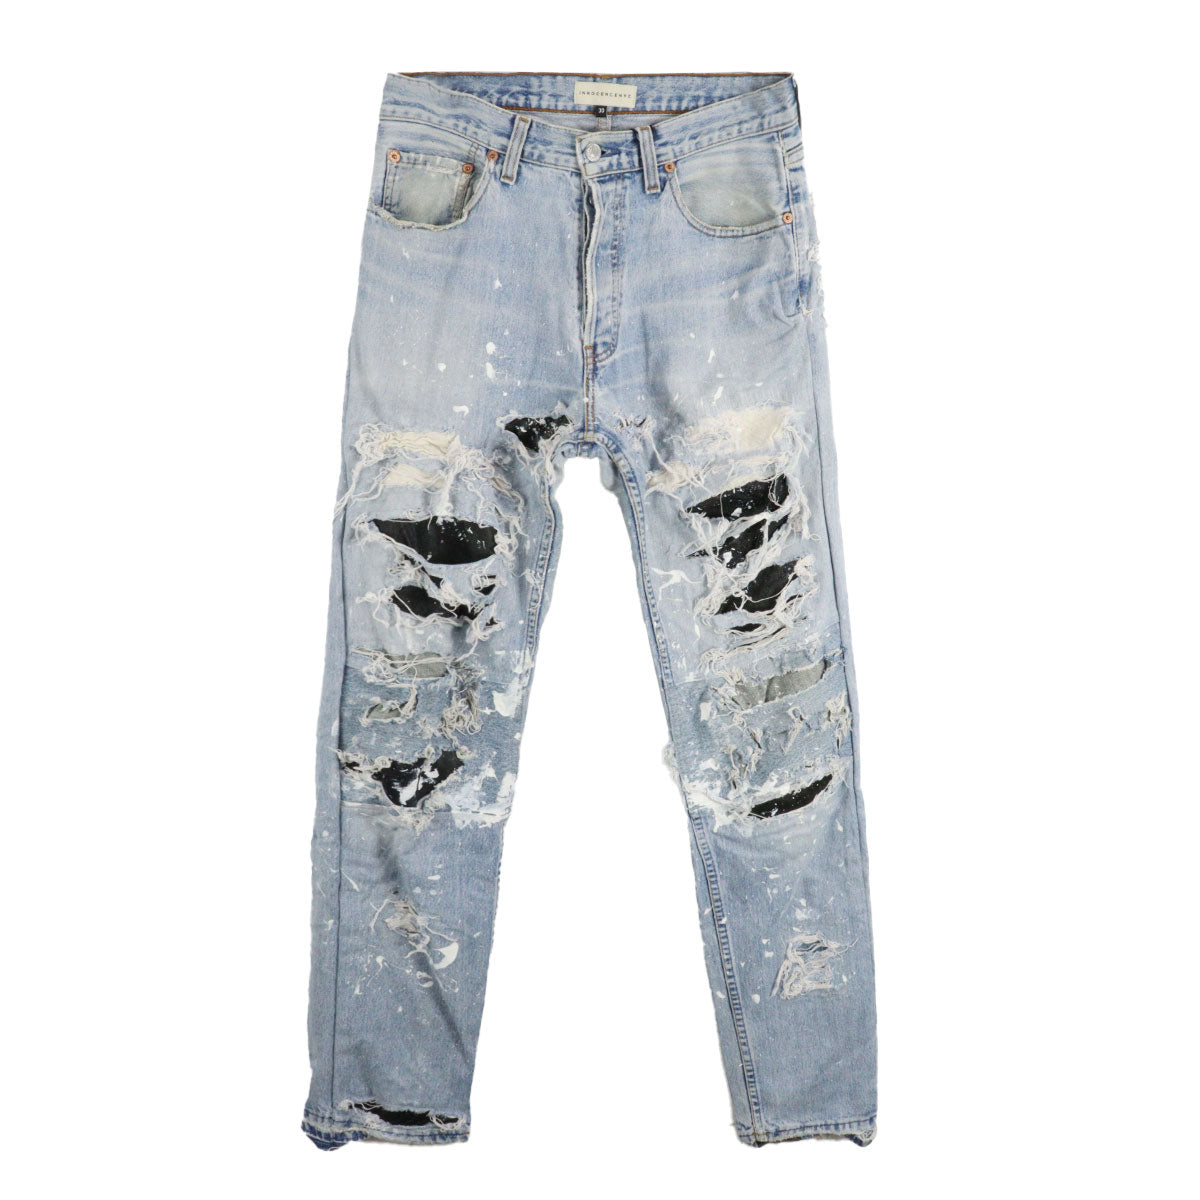 DESTROY LEATHER DENIM PANTS 30B – Why are you here?